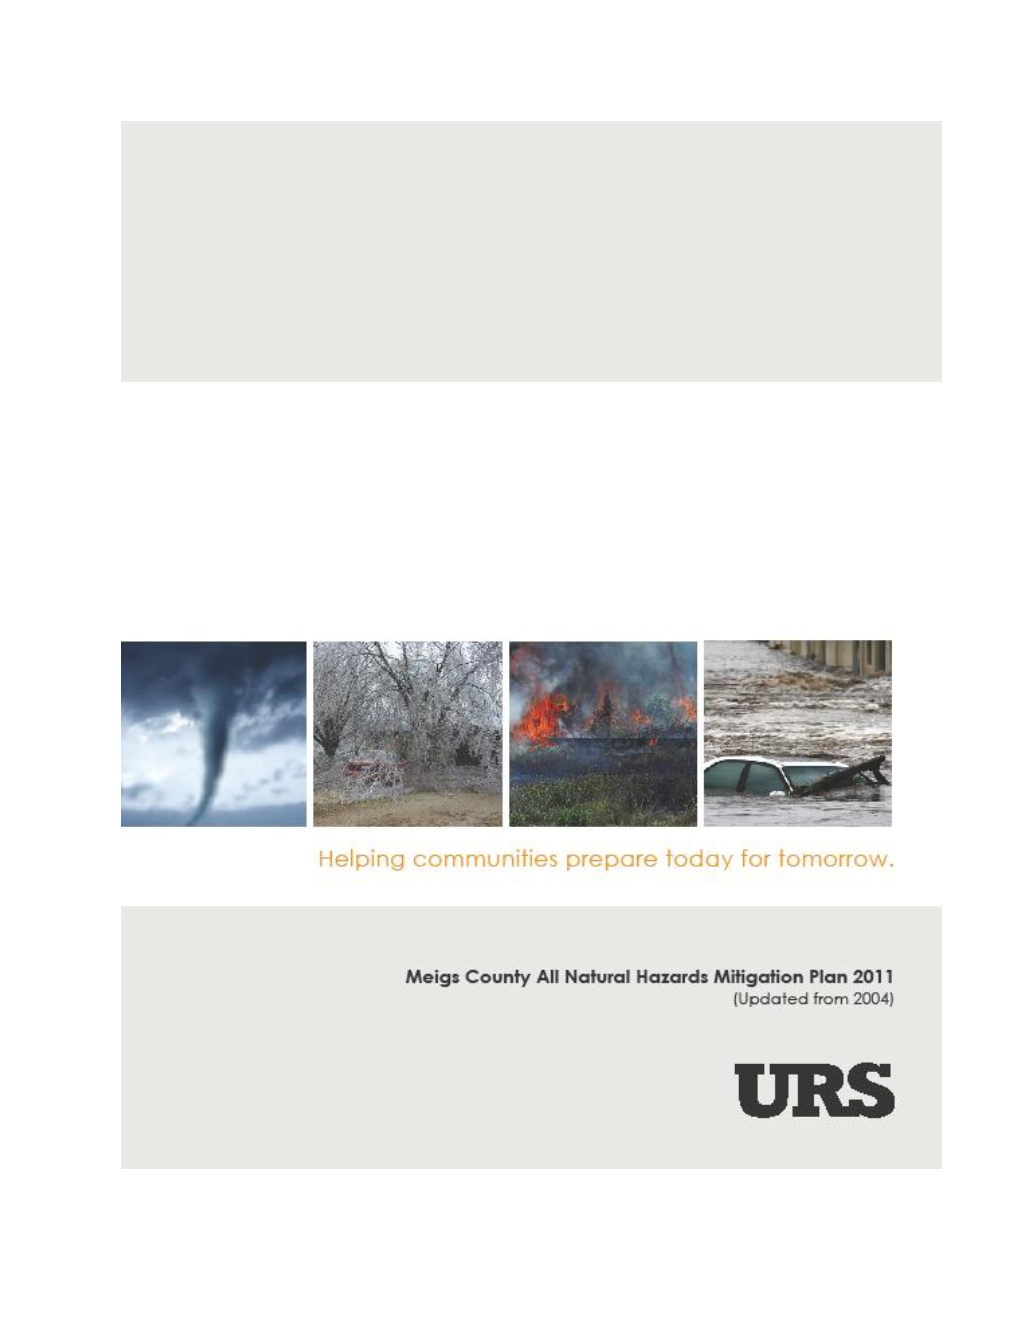 The Meigs County All Natural Hazards Mitigation Plan 2011